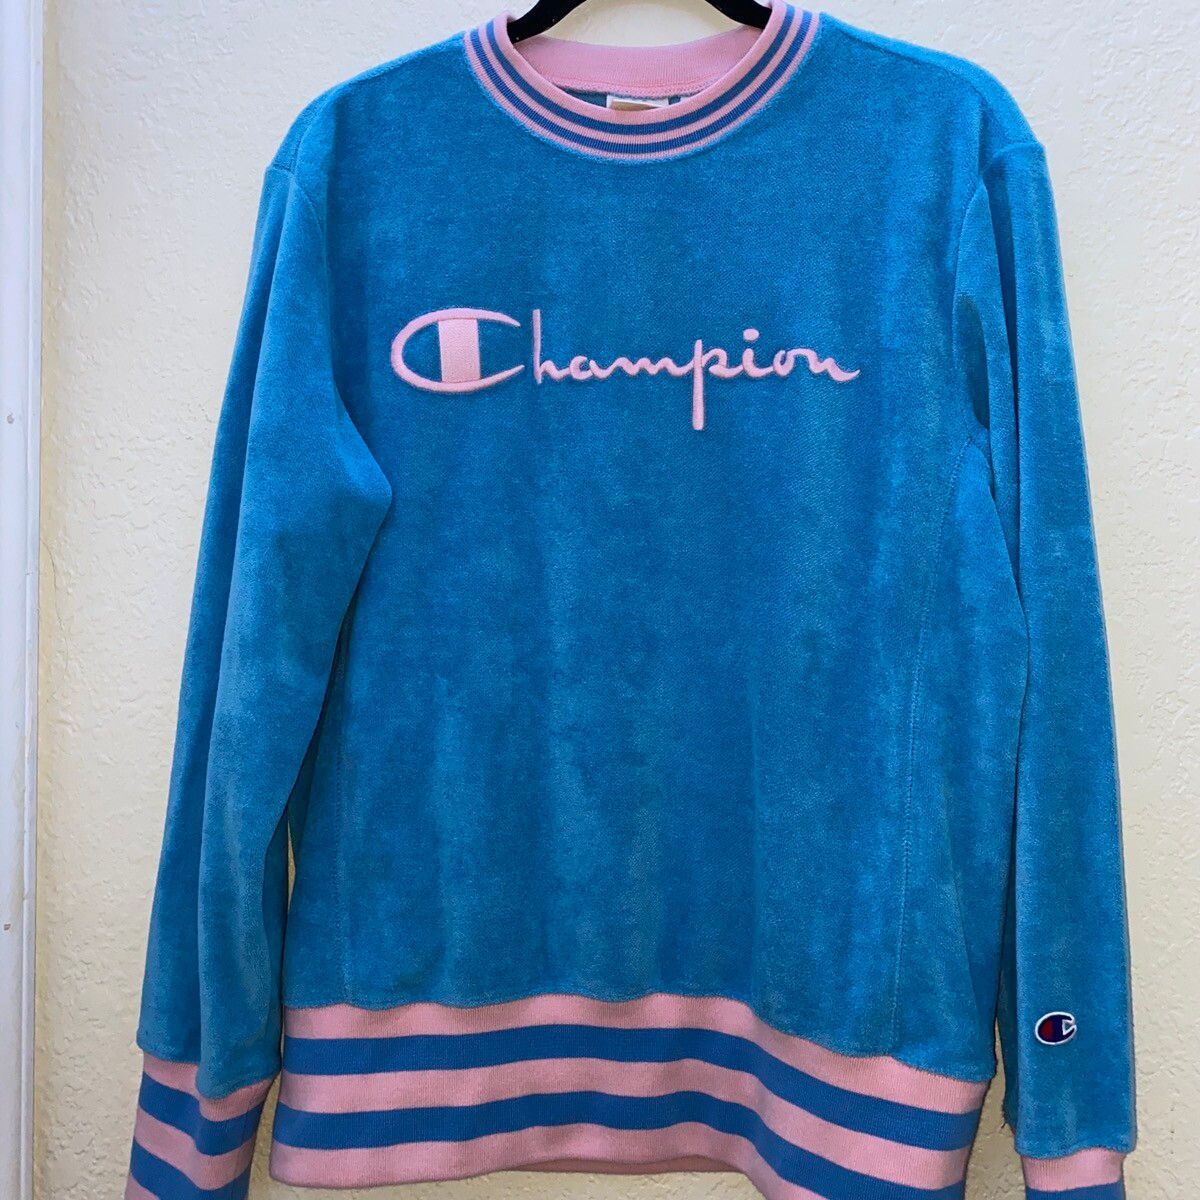 Champion Campion toweling sweater Size US M / EU 48-50 / 2 - 1 Preview